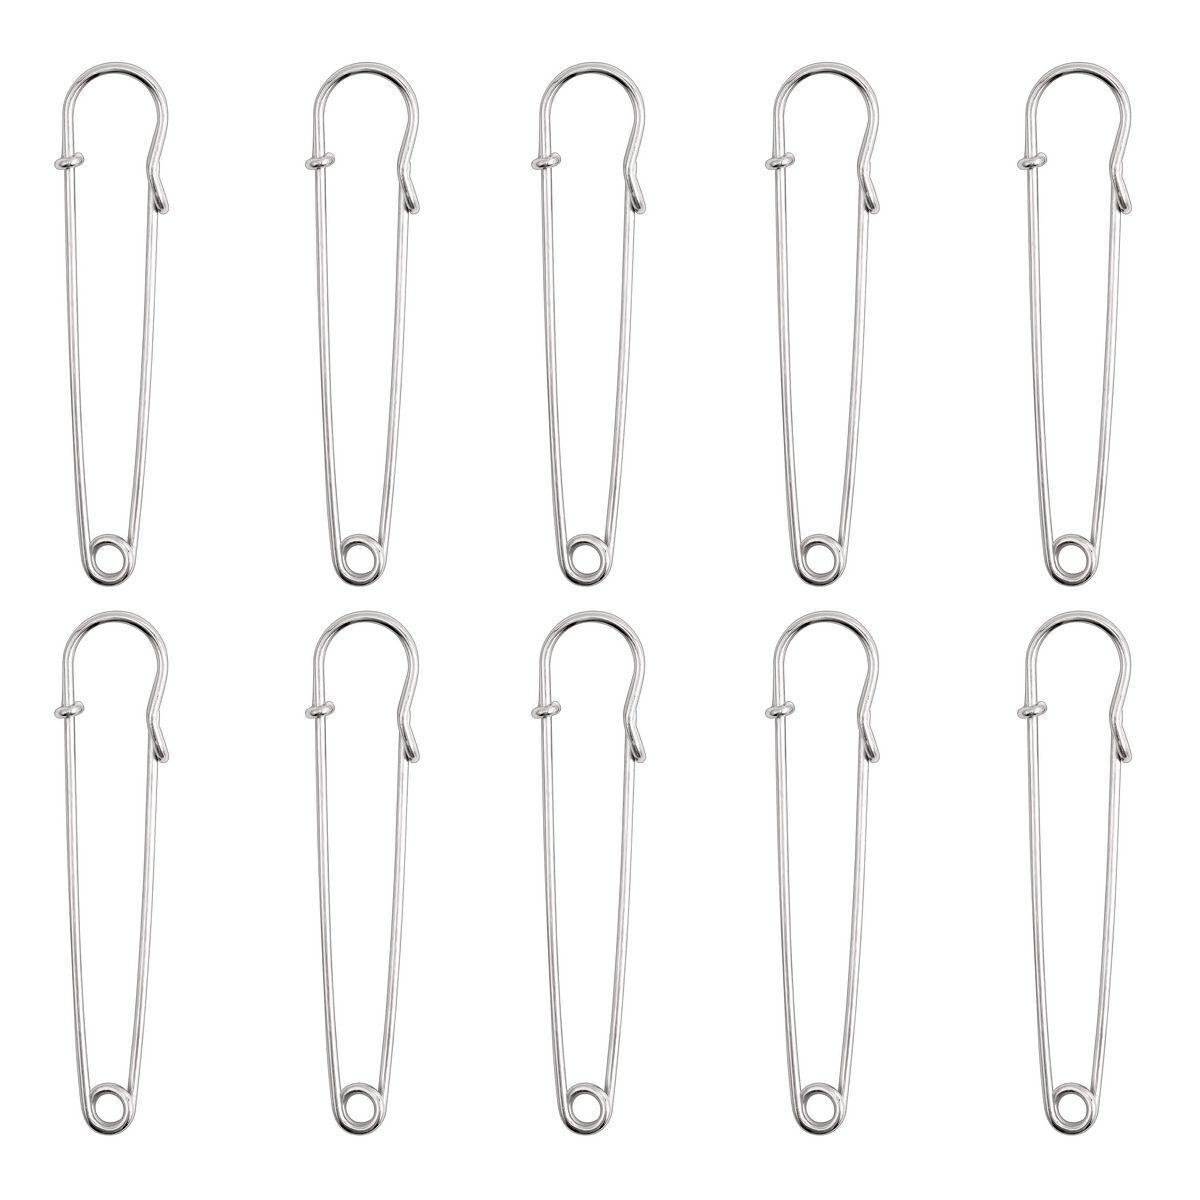 30PCS Safety Pins Large Heavy Duty Safety Pin 4inch Blanket Stainless Steel